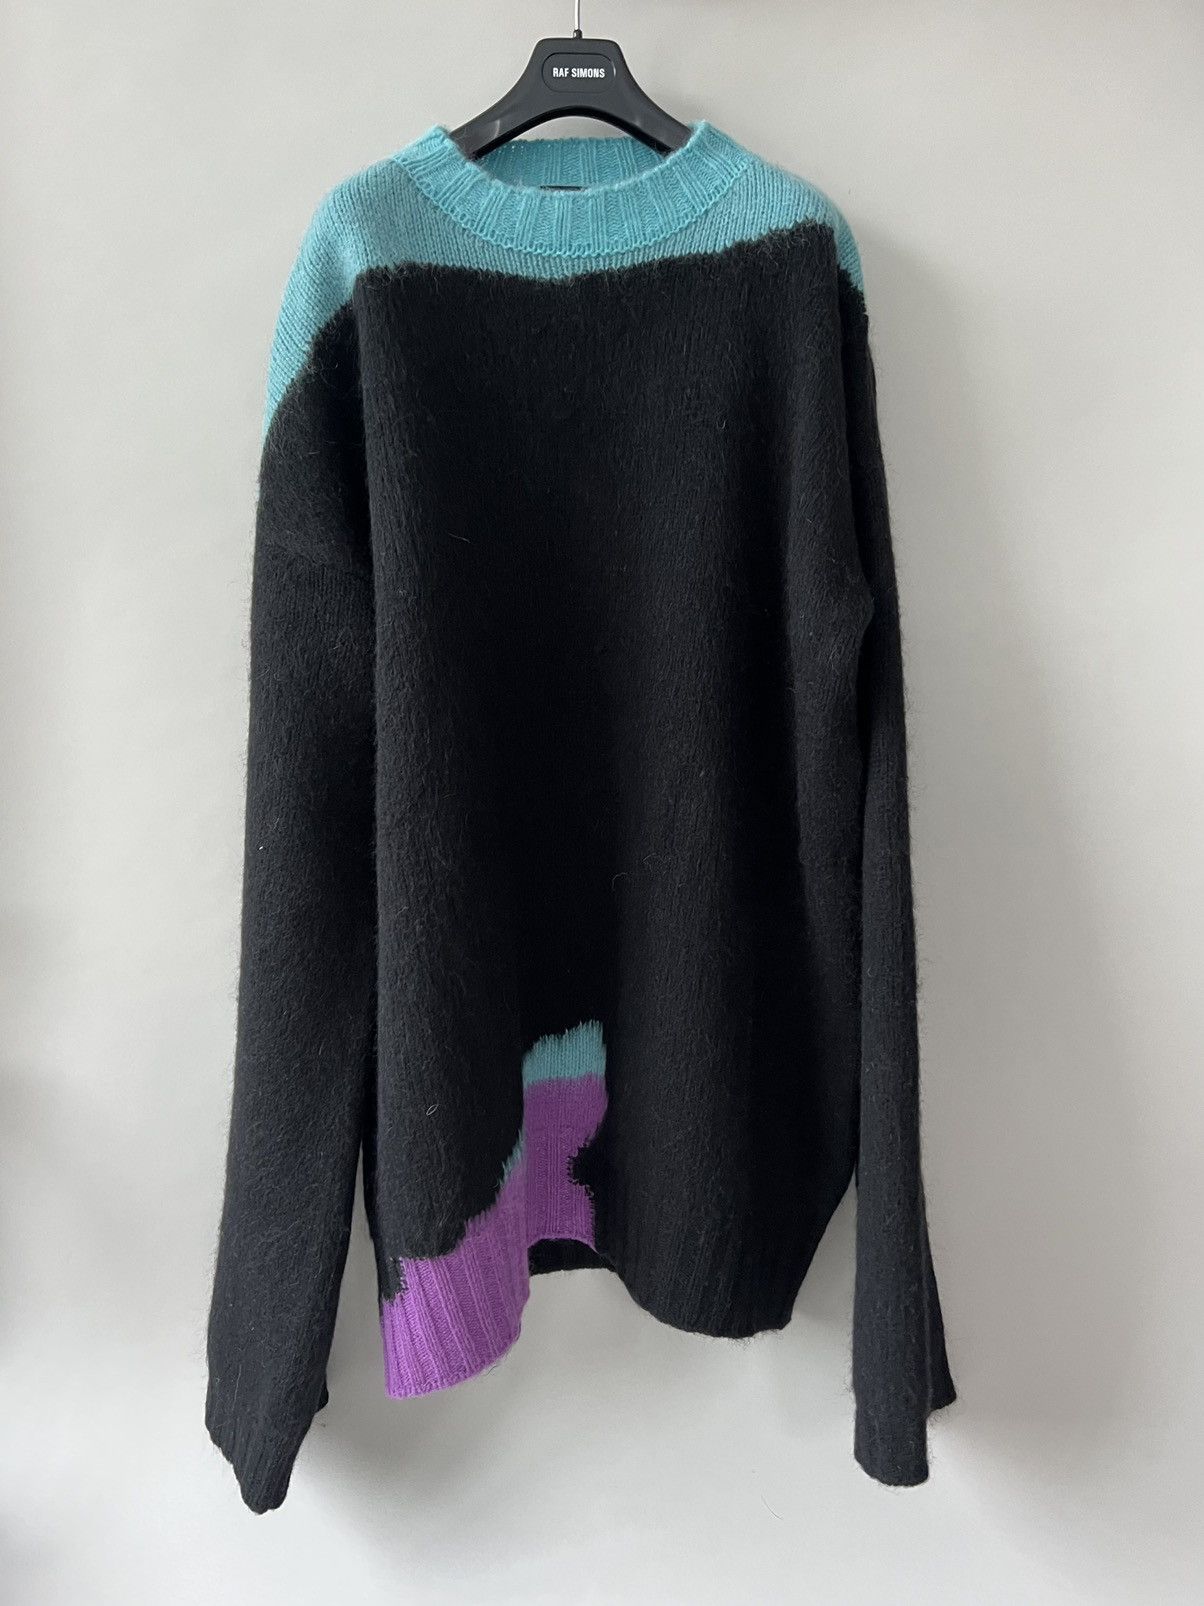 Raf Simons 21aw Oversized boiled knit | camillevieraservices.com